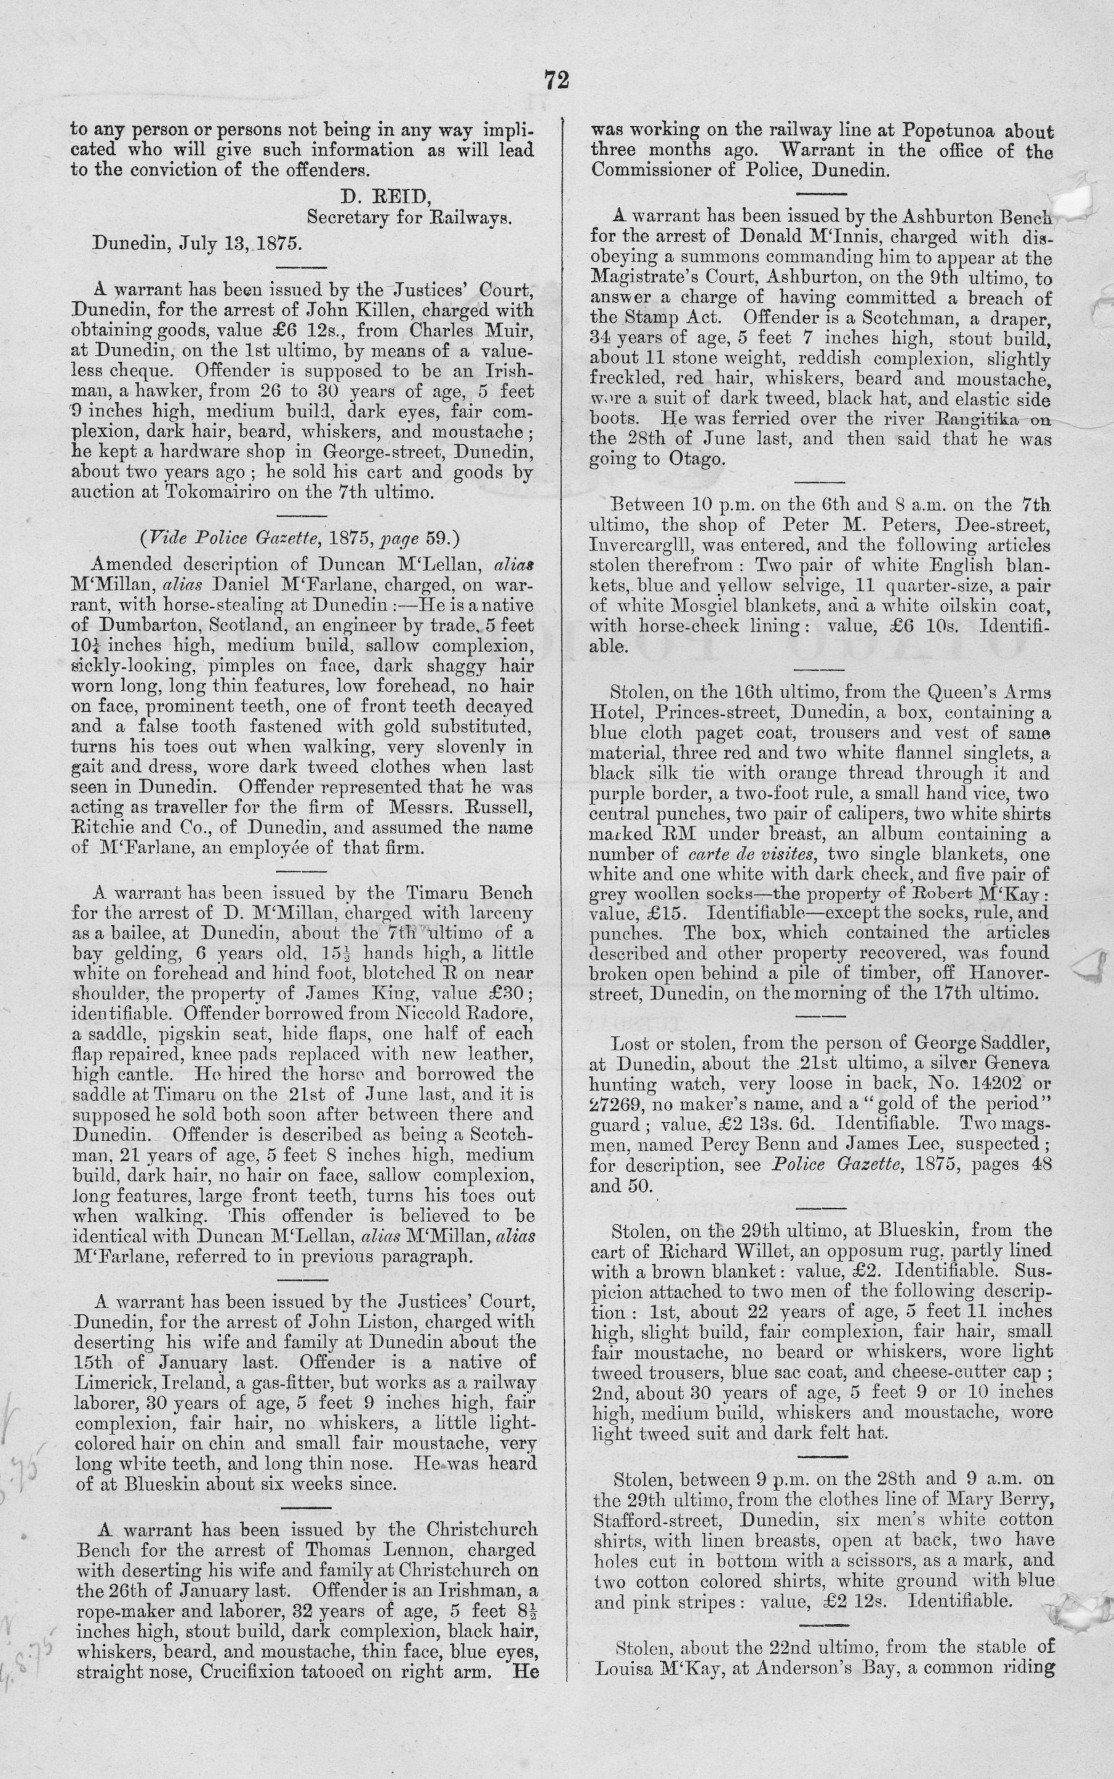 Papers Past, Magazines and Journals, Otago Police Gazette, 10 August  1875